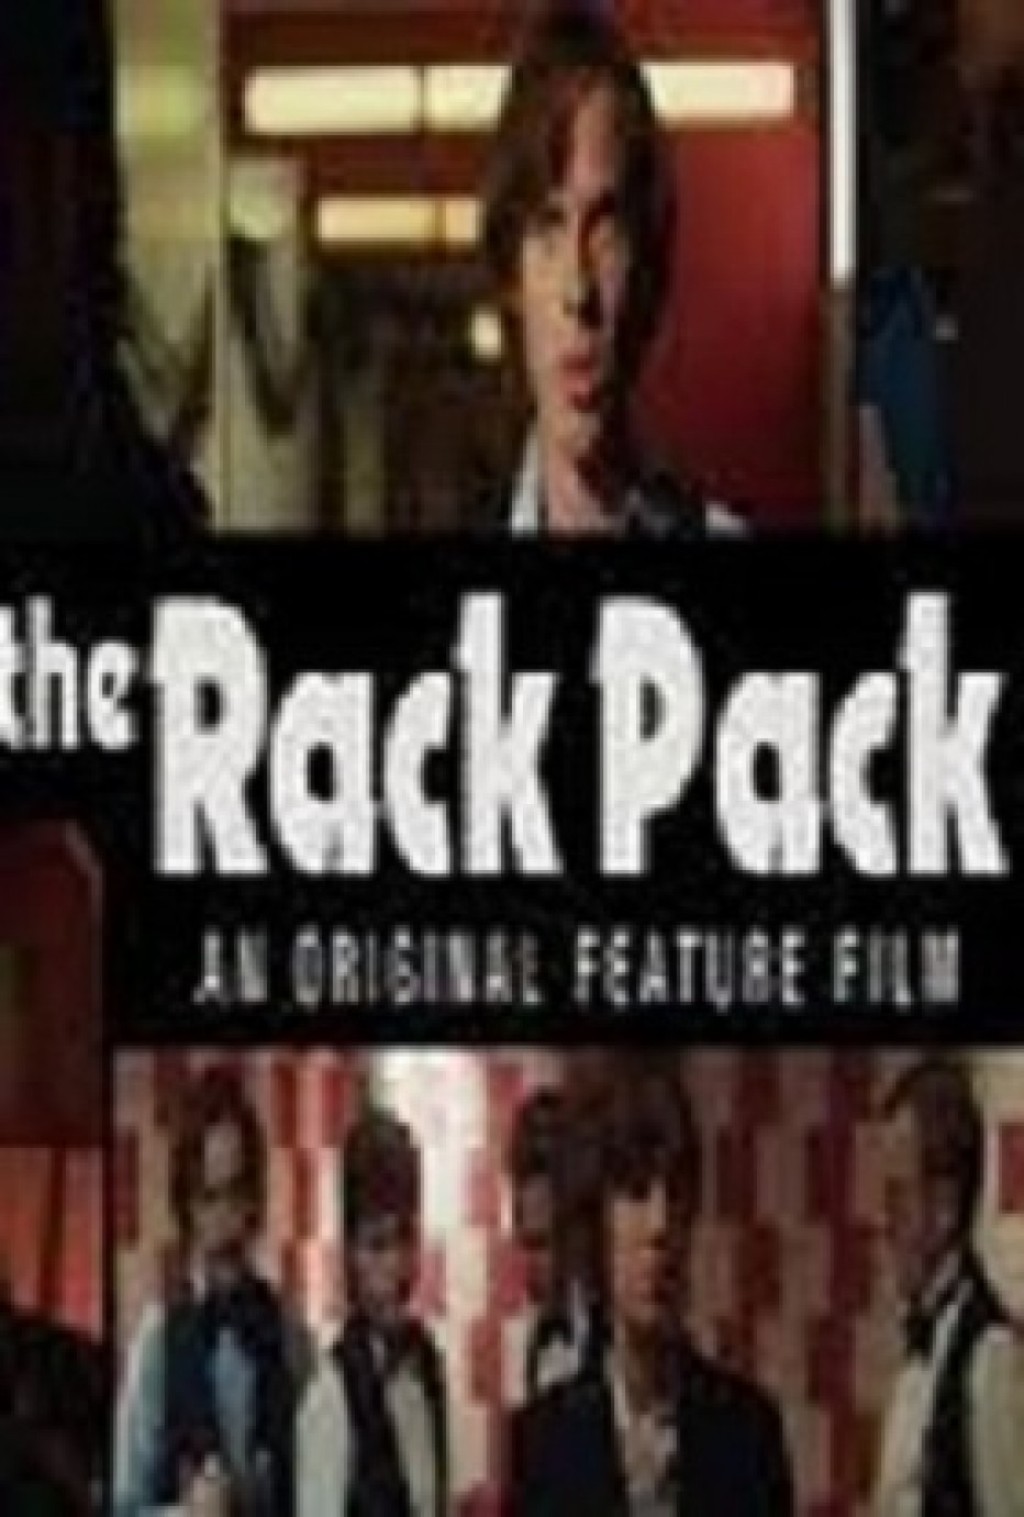 The Rack Pack Movie Review